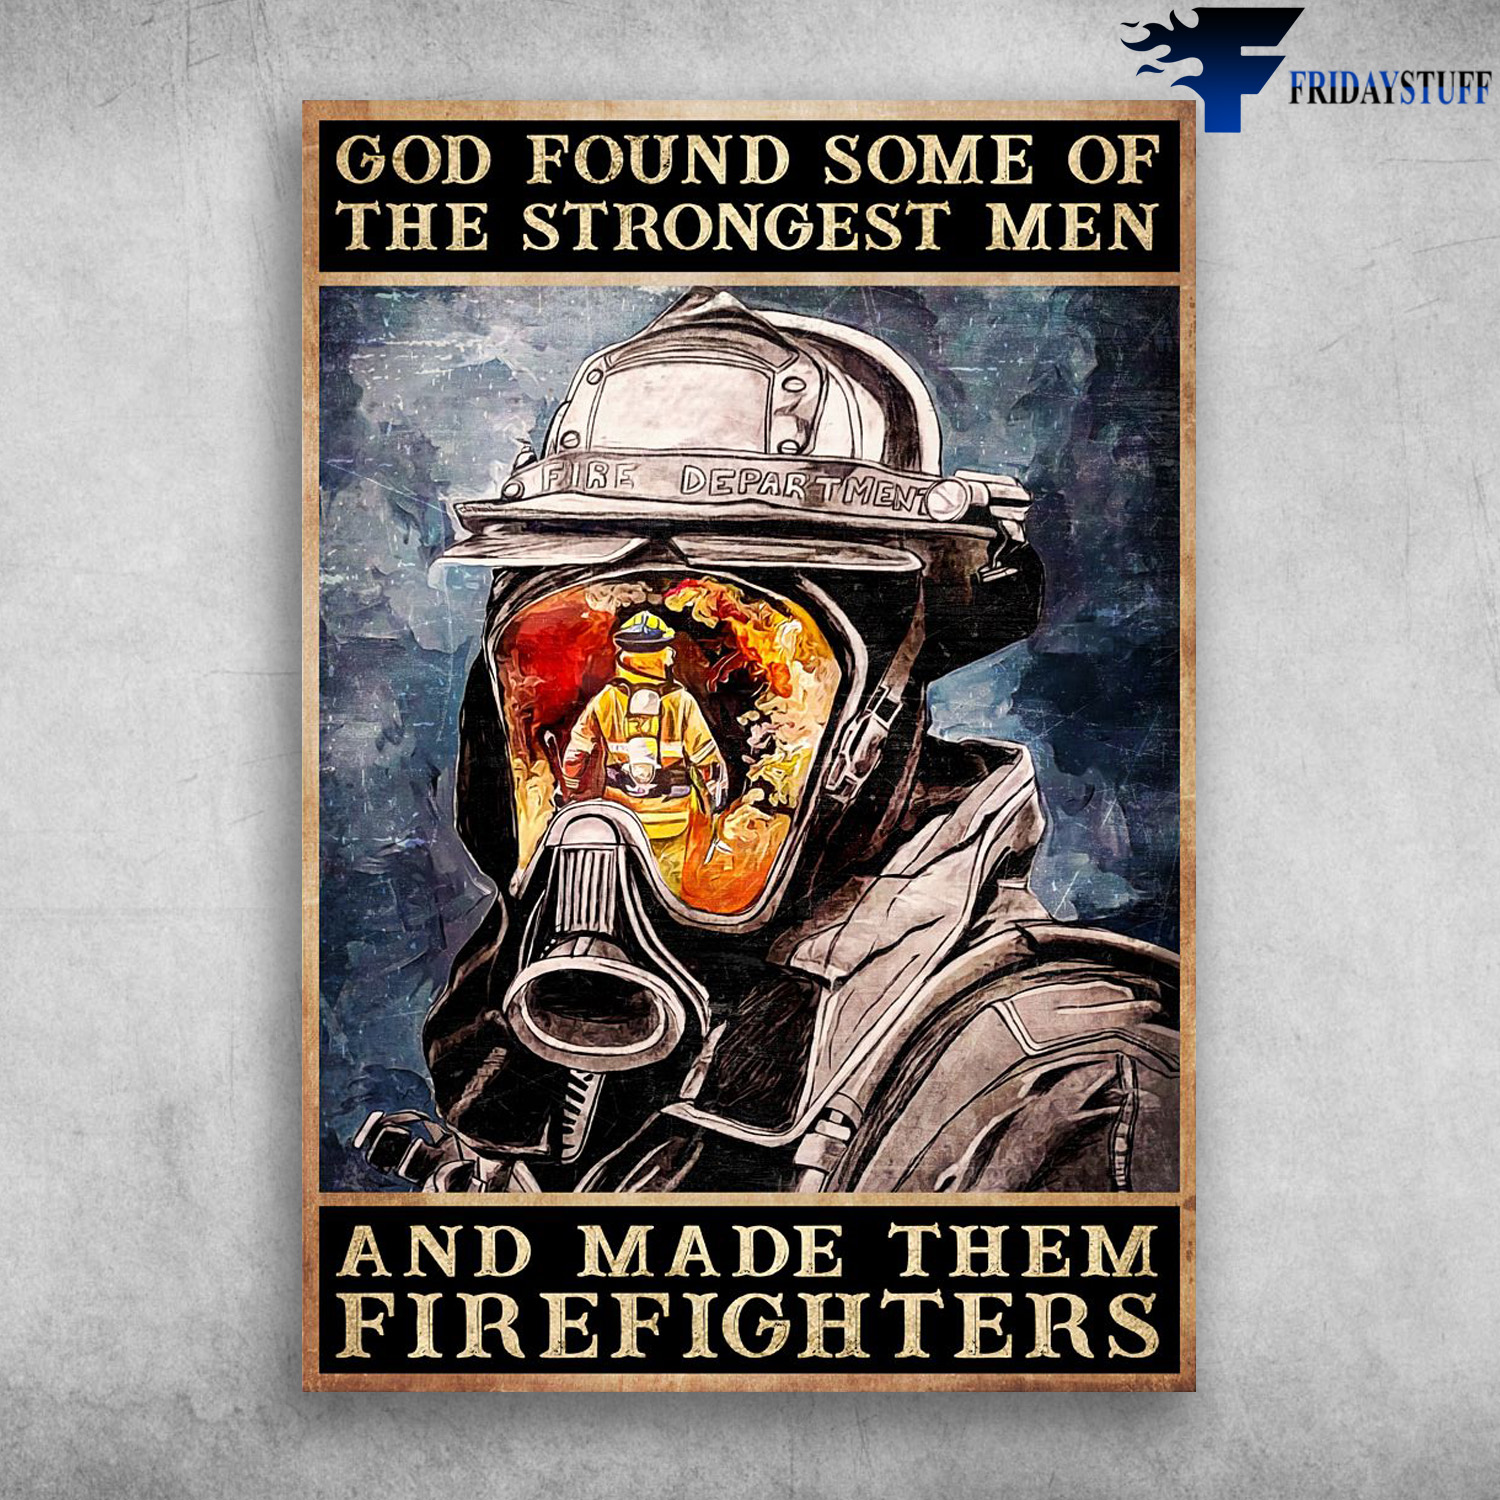 Firefighter Man - God Found Some Of The Strongest Men, And Made Them Firefighters